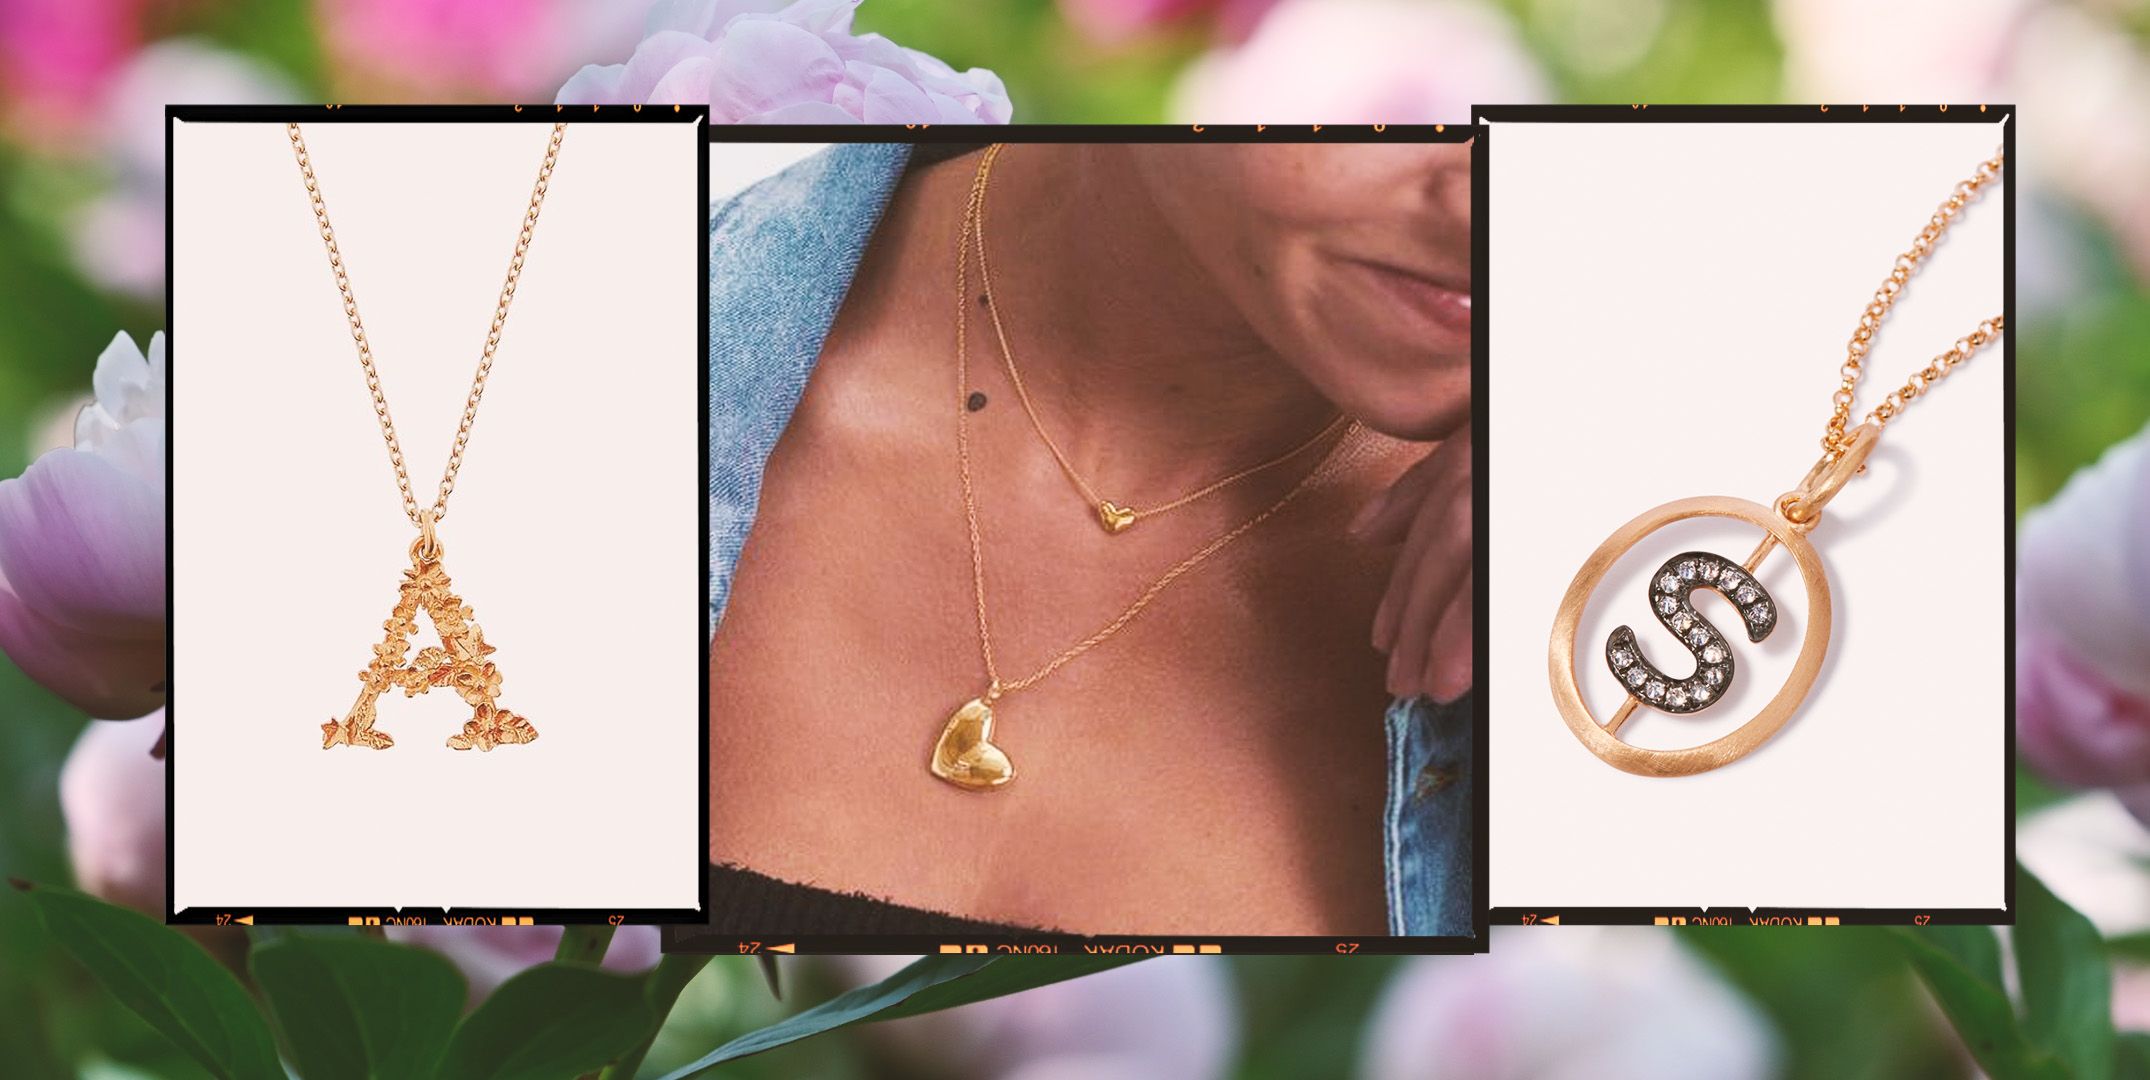 ESPRIT - Gold-Tone Sterling Silver Circle Charm Necklace at our Online Shop